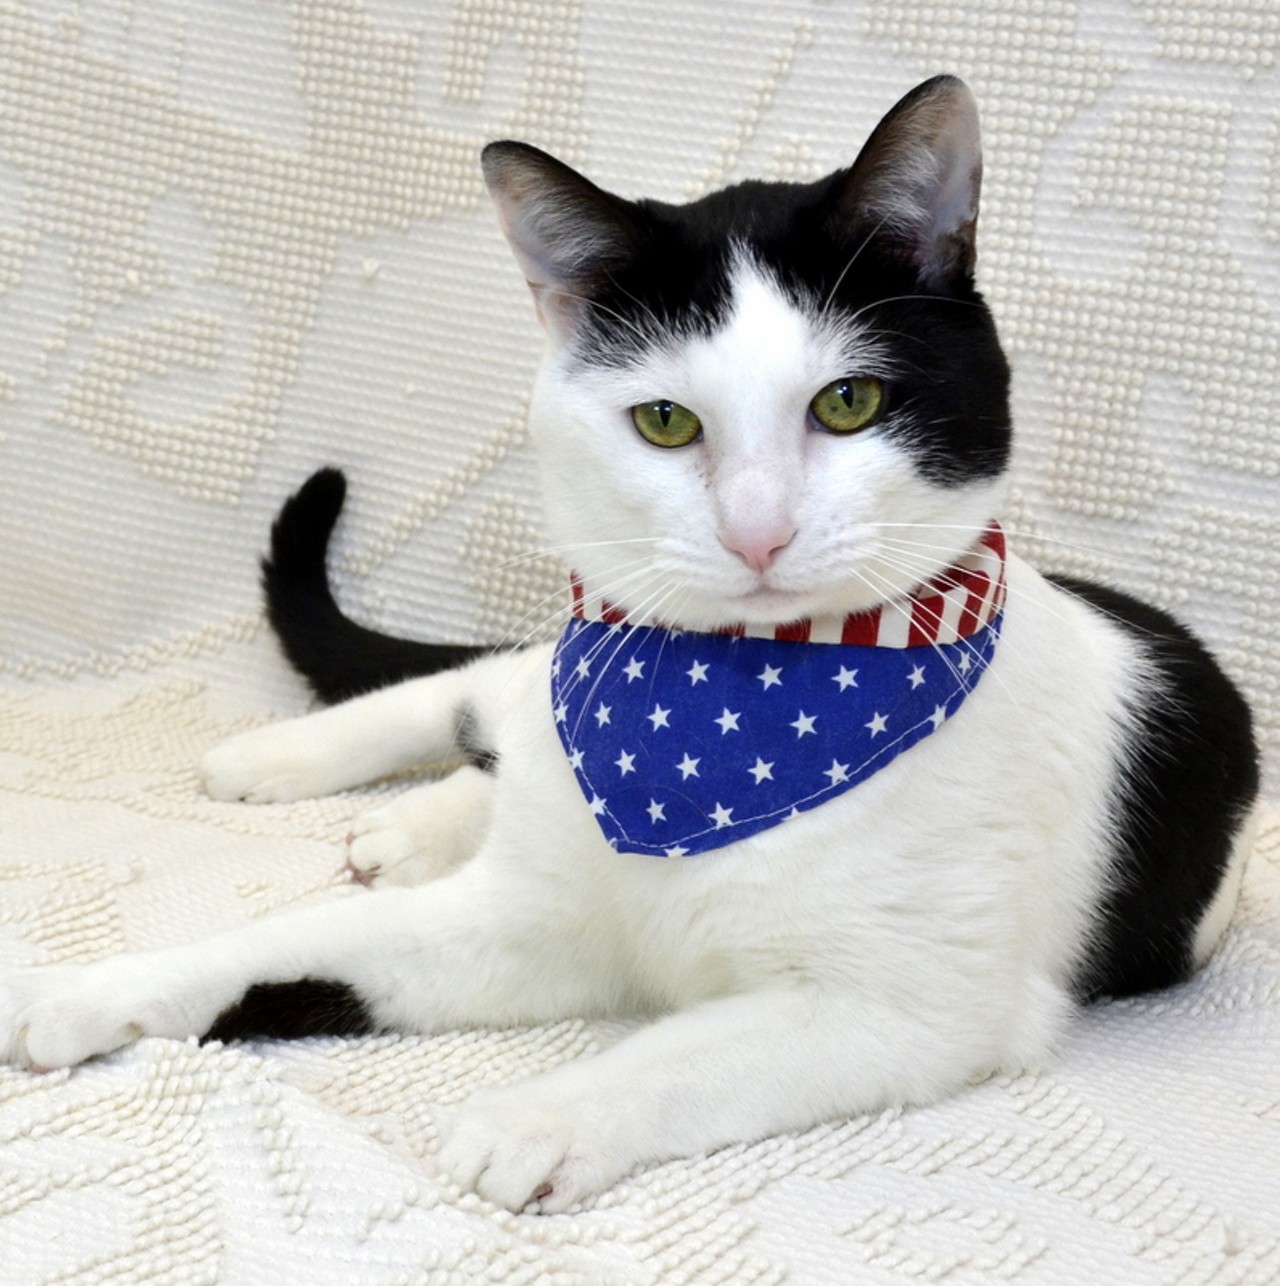 NAME: Tom Petty
GENDER: Male
BREED: Domestic Short Hair
AGE: 3 years, 1 month
WEIGHT: 8.5 pounds
SPECIAL CONSIDERATIONS: &#147;Hard-working&#148;, or barn cat
REASON I CAME TO MHS: Owner surrender
LOCATION: Berman Center for Animal Care in Westland
ID NUMBER: 864063